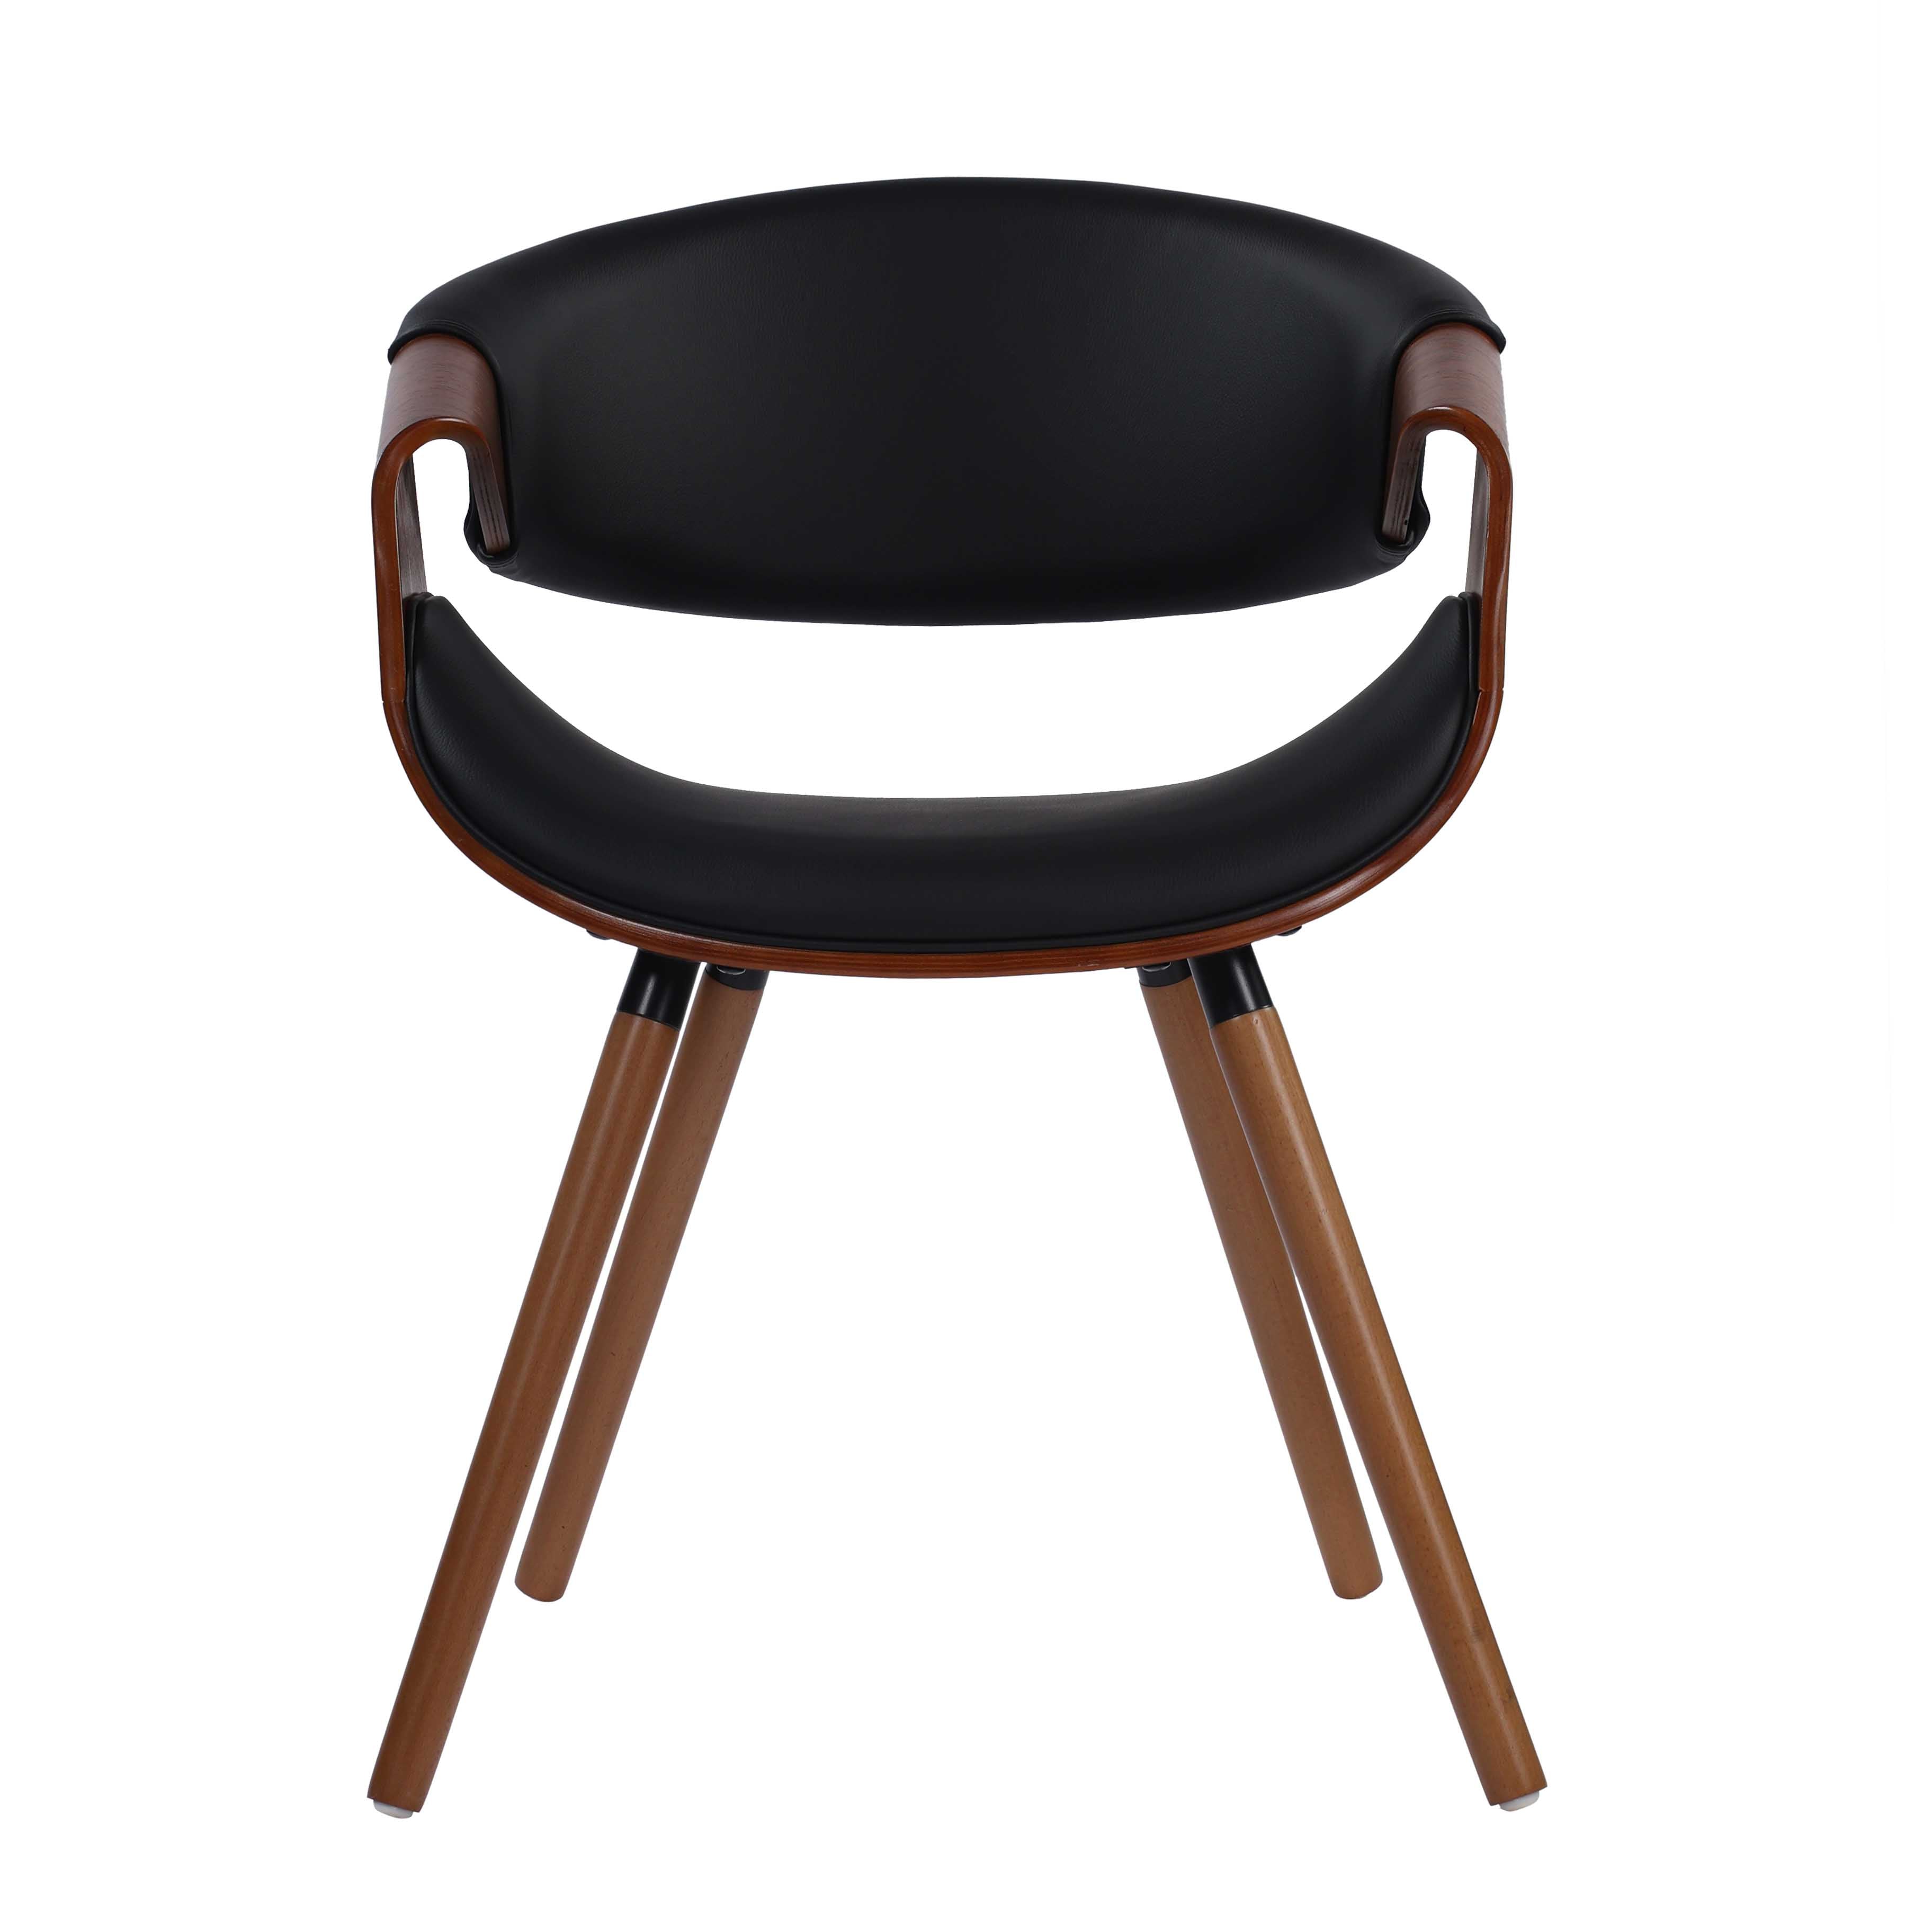 Ariana Living Butterfly Dining Chair in Leather Fabric and Walnut Wood Finish